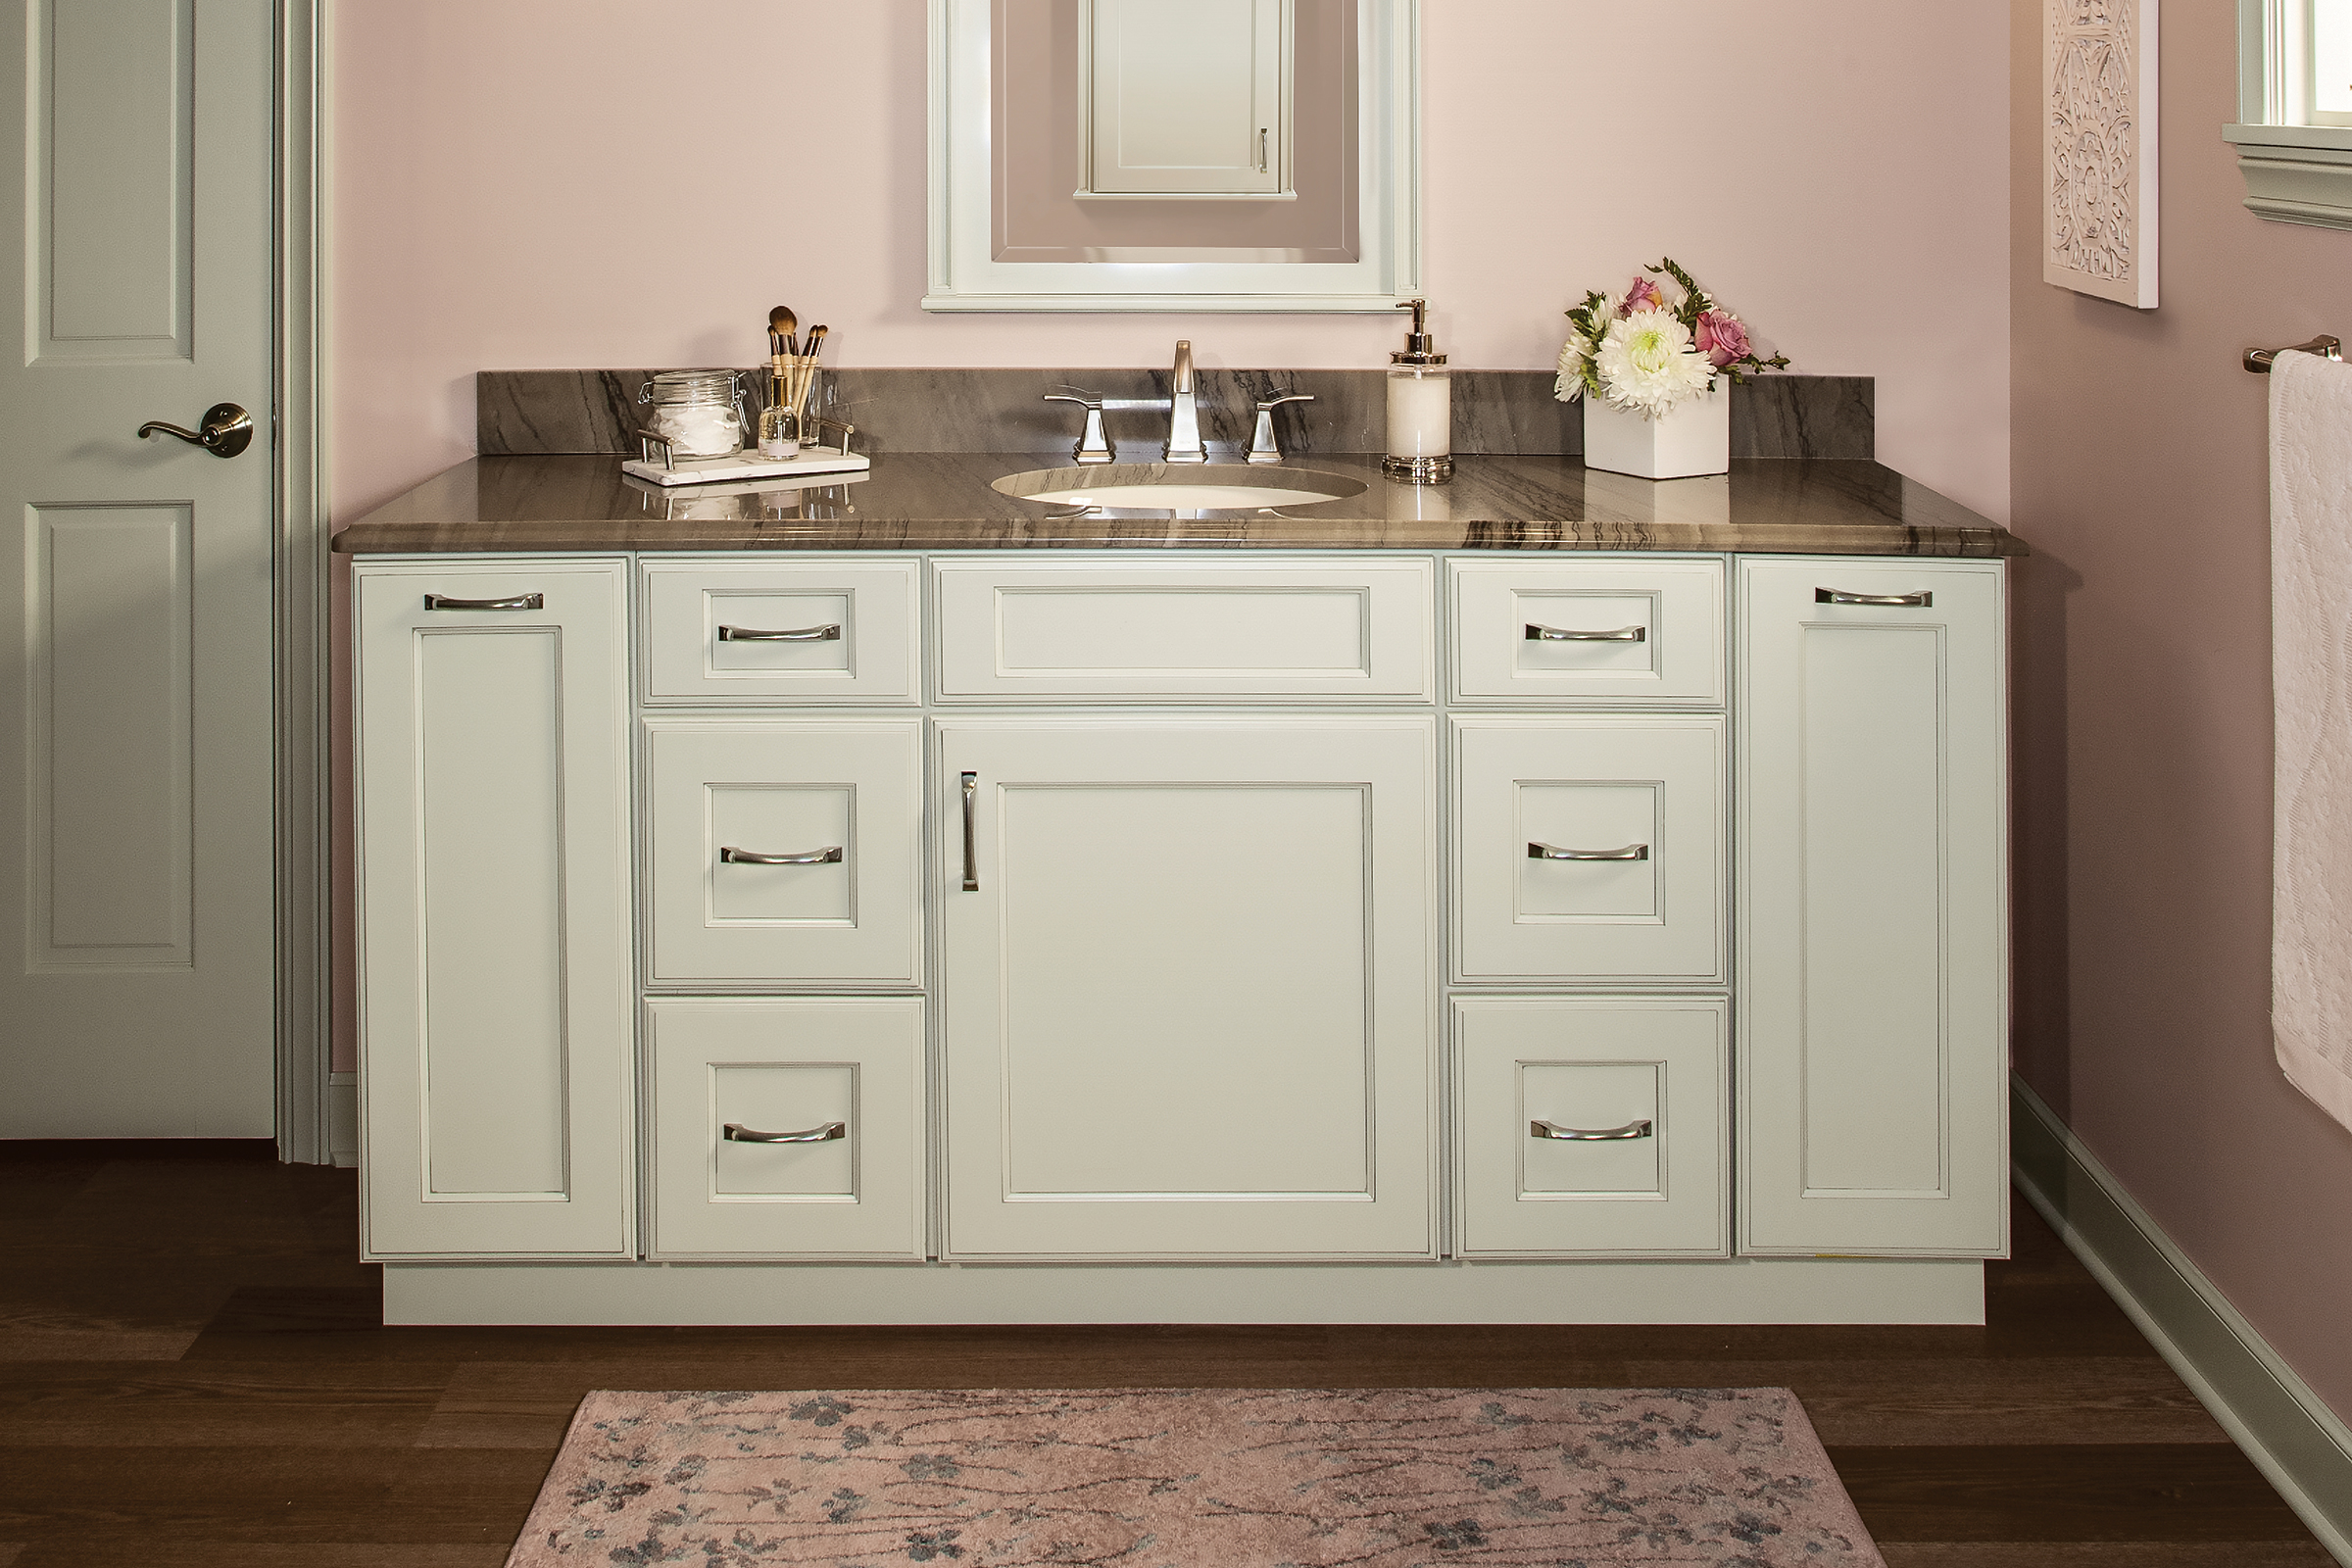 Glam bathroom with blush walls and KraftMaid vanity in Moonshine painted finish